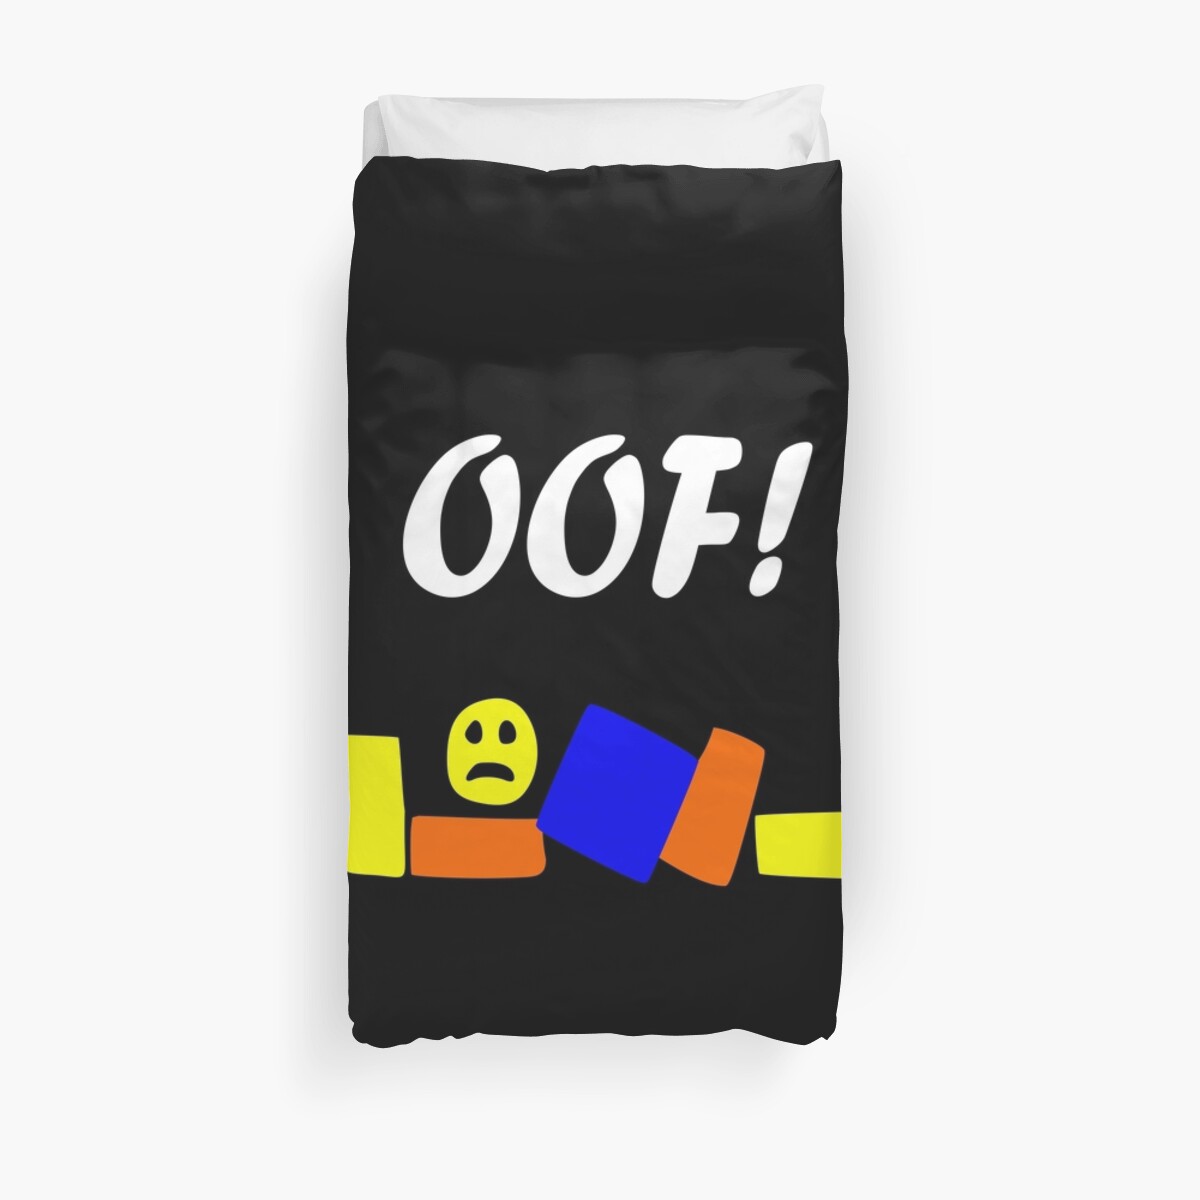 Faazpf2dqhty9m - roblox oof duvet covers redbubble